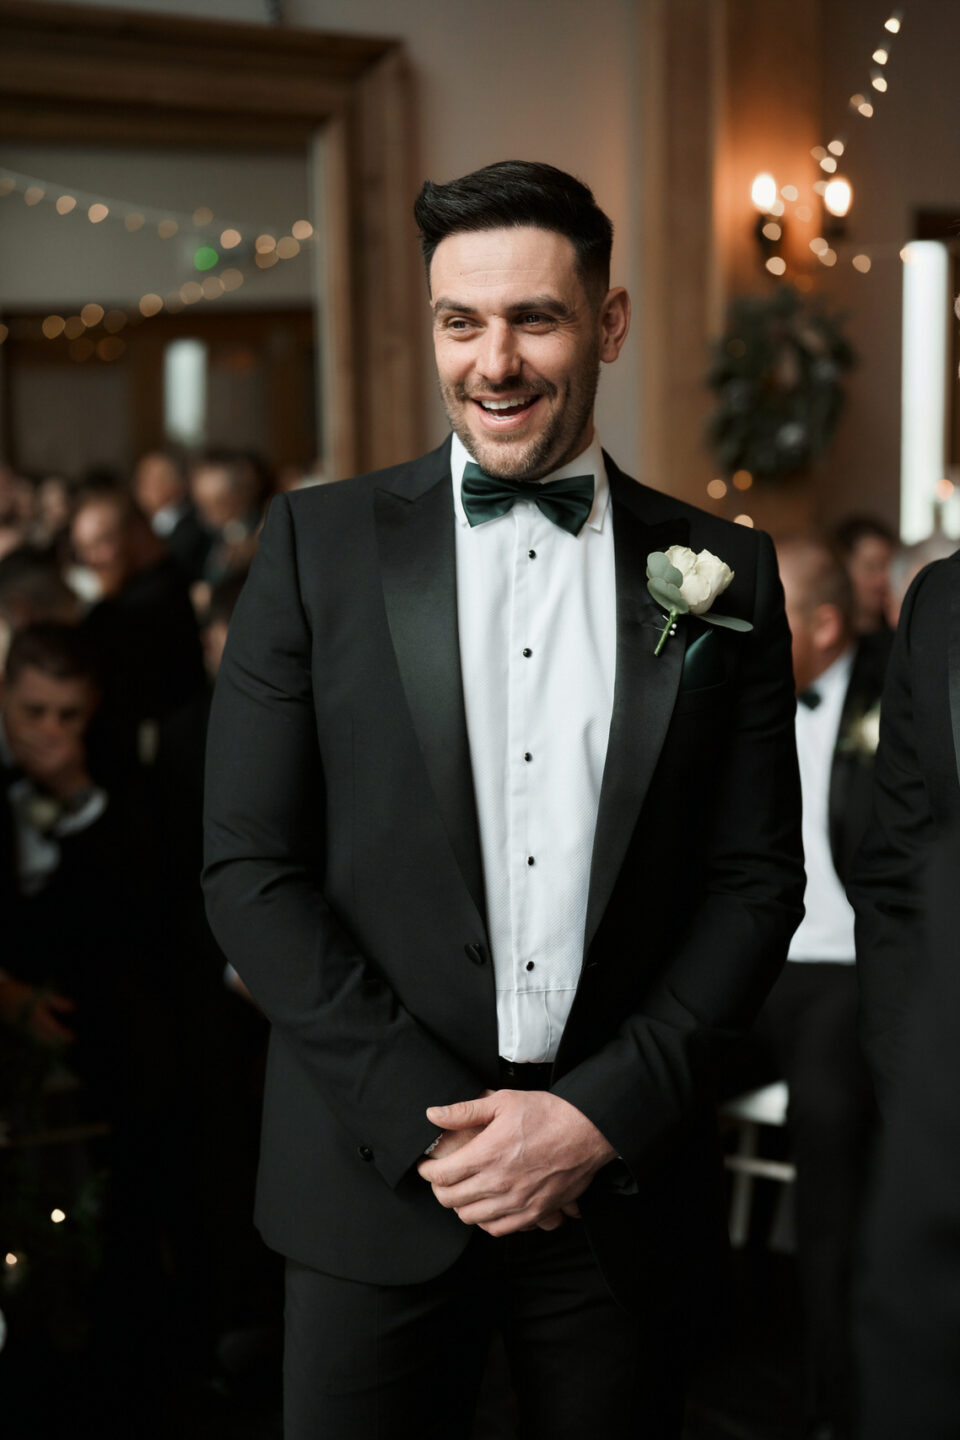 A man dressed in a suit is smiling while walking down the aisle at his wedding.